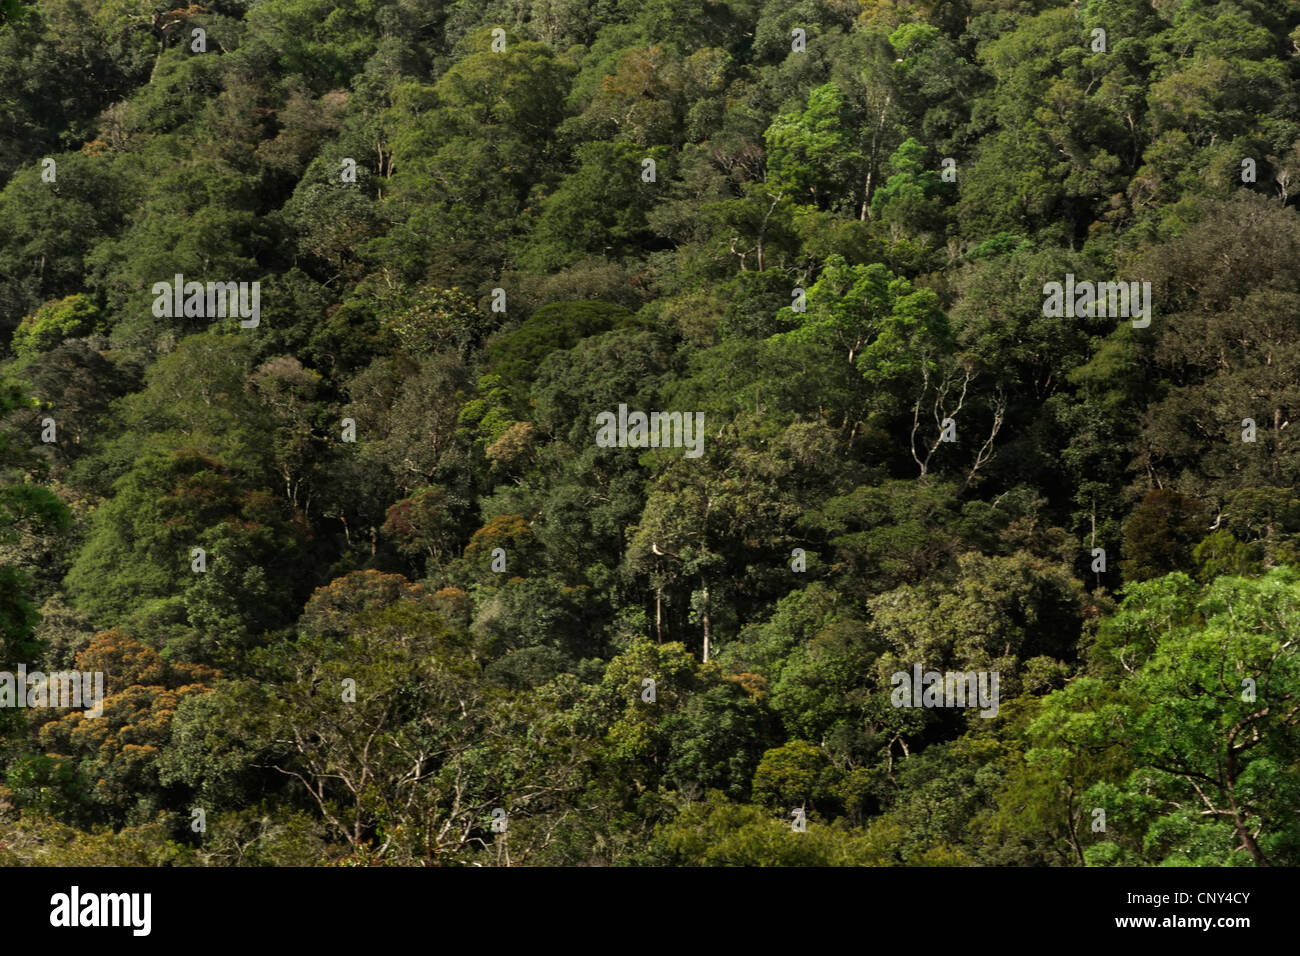 view from above on the tropical rain forest, Malaysia, Sabah, Kinabalu National Park, Borneo Stock Photo